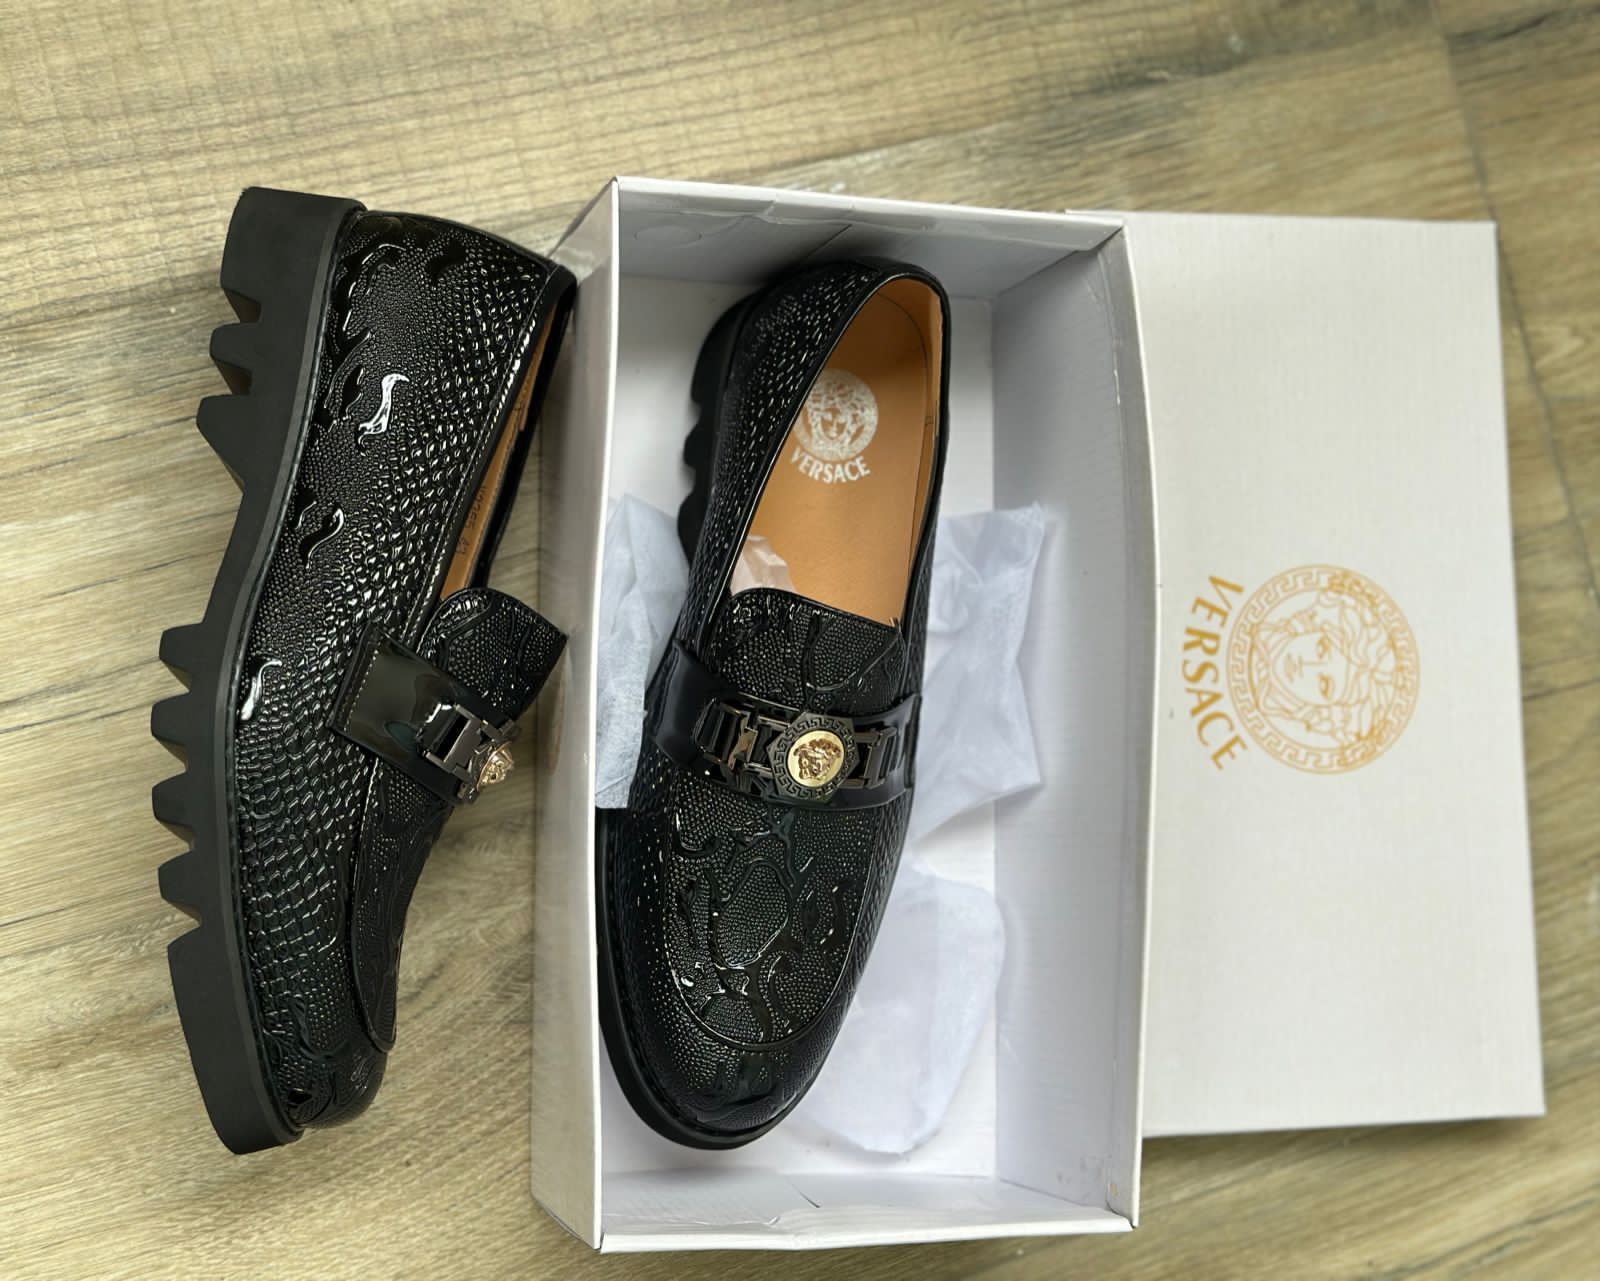 Imported Loafers With Dust Bag Original Box